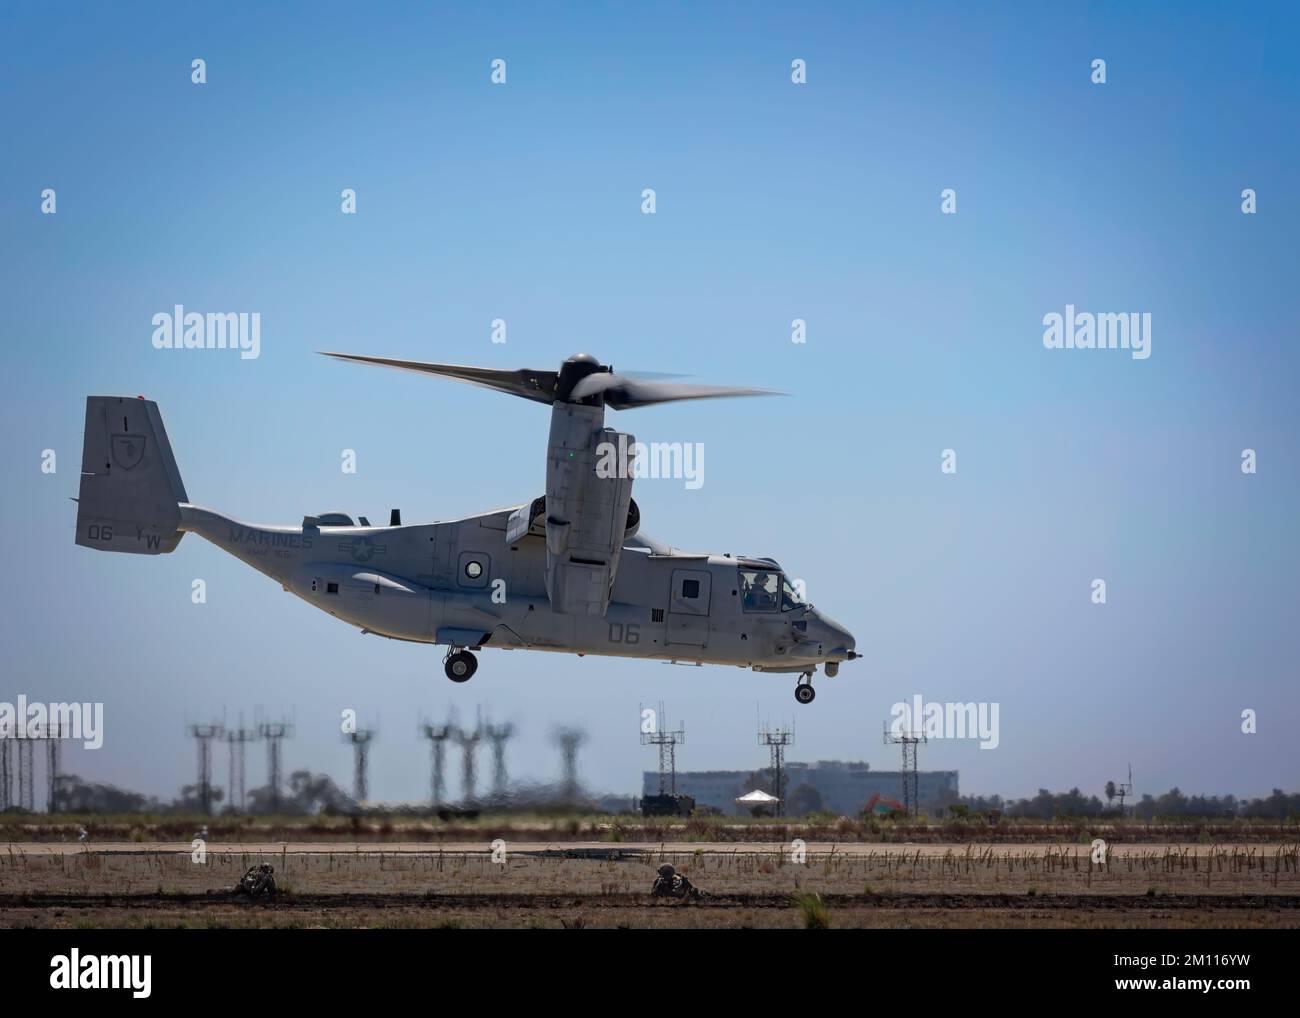 A V-22 Osprey takes off during the Marine Air-Ground Task Force (MAGTF) demonstration at the 2022 Miramar Airshow in San Diego, California. Stock Photo